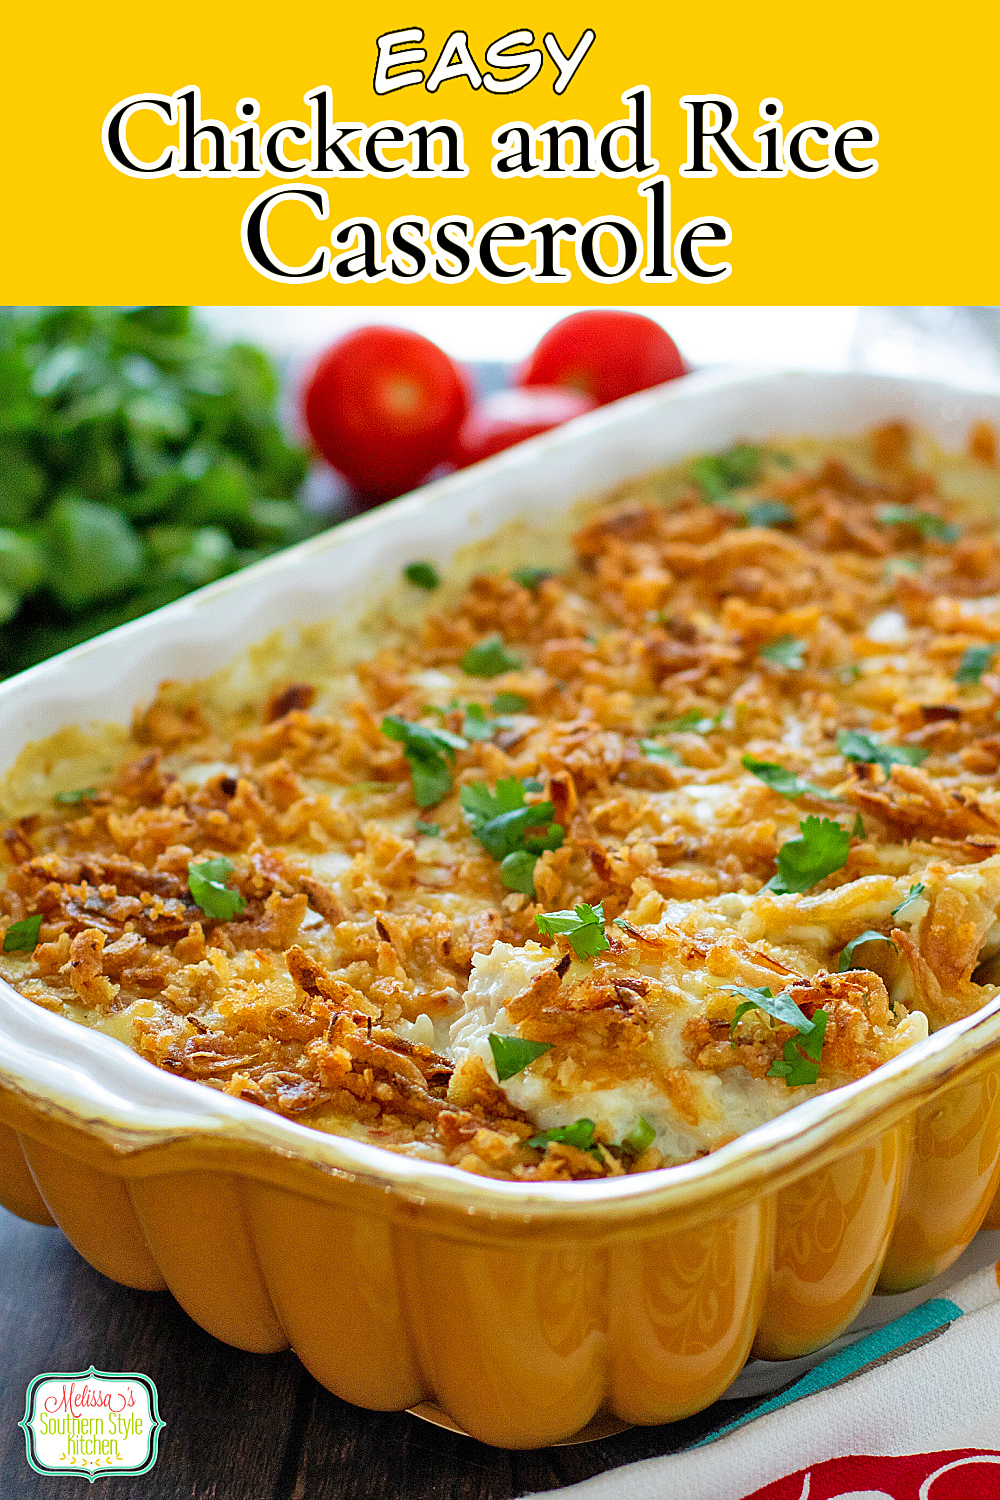 This Easy Chicken and Rice Casserole features plenty of pepper jack cheese and green chiles adding a pop of flavor. #chickencasserole #easychickenrecipes #casseroles #ricerecipes #ricecasserole #chickenandrice via @melissasssk